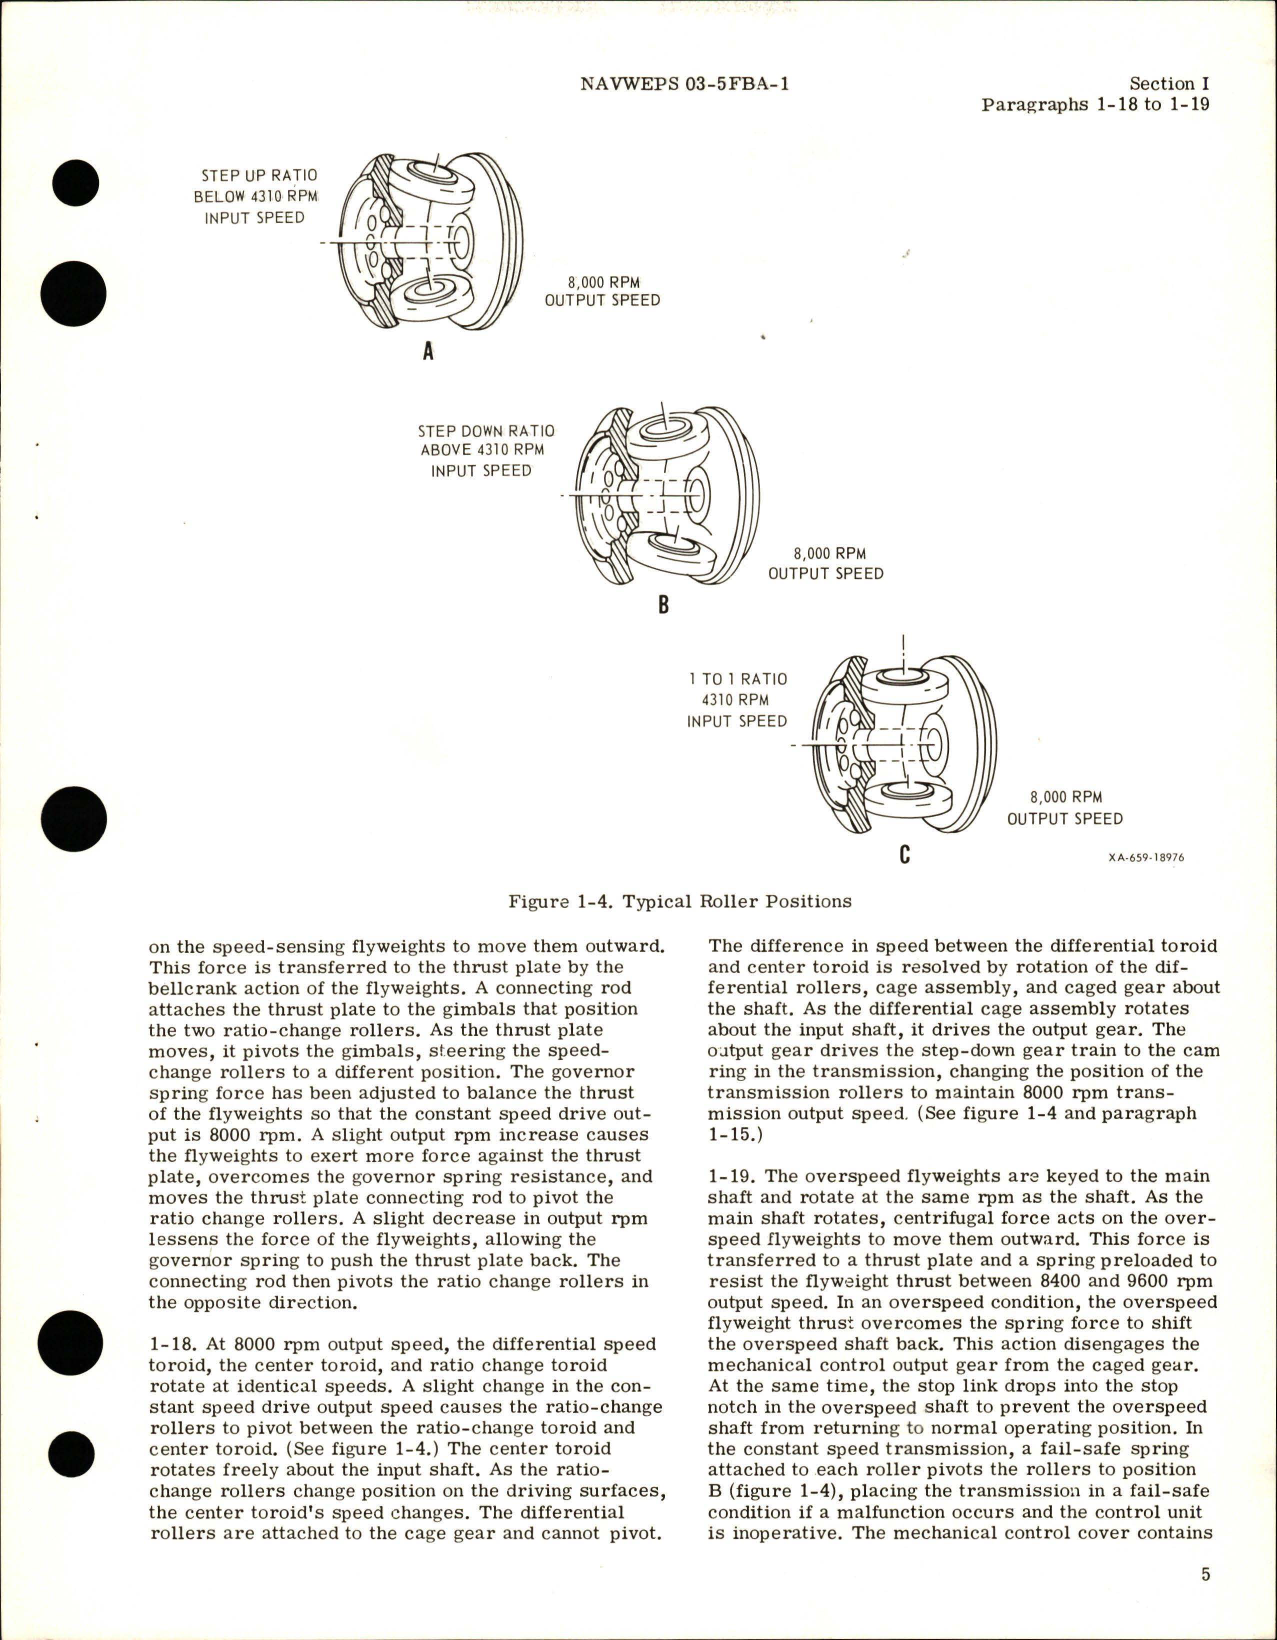 Sample page 9 from AirCorps Library document: Operation and Maintenance Instructions for Constant Speed Drive - Model LD6-3, LD6-9, and LD6-10